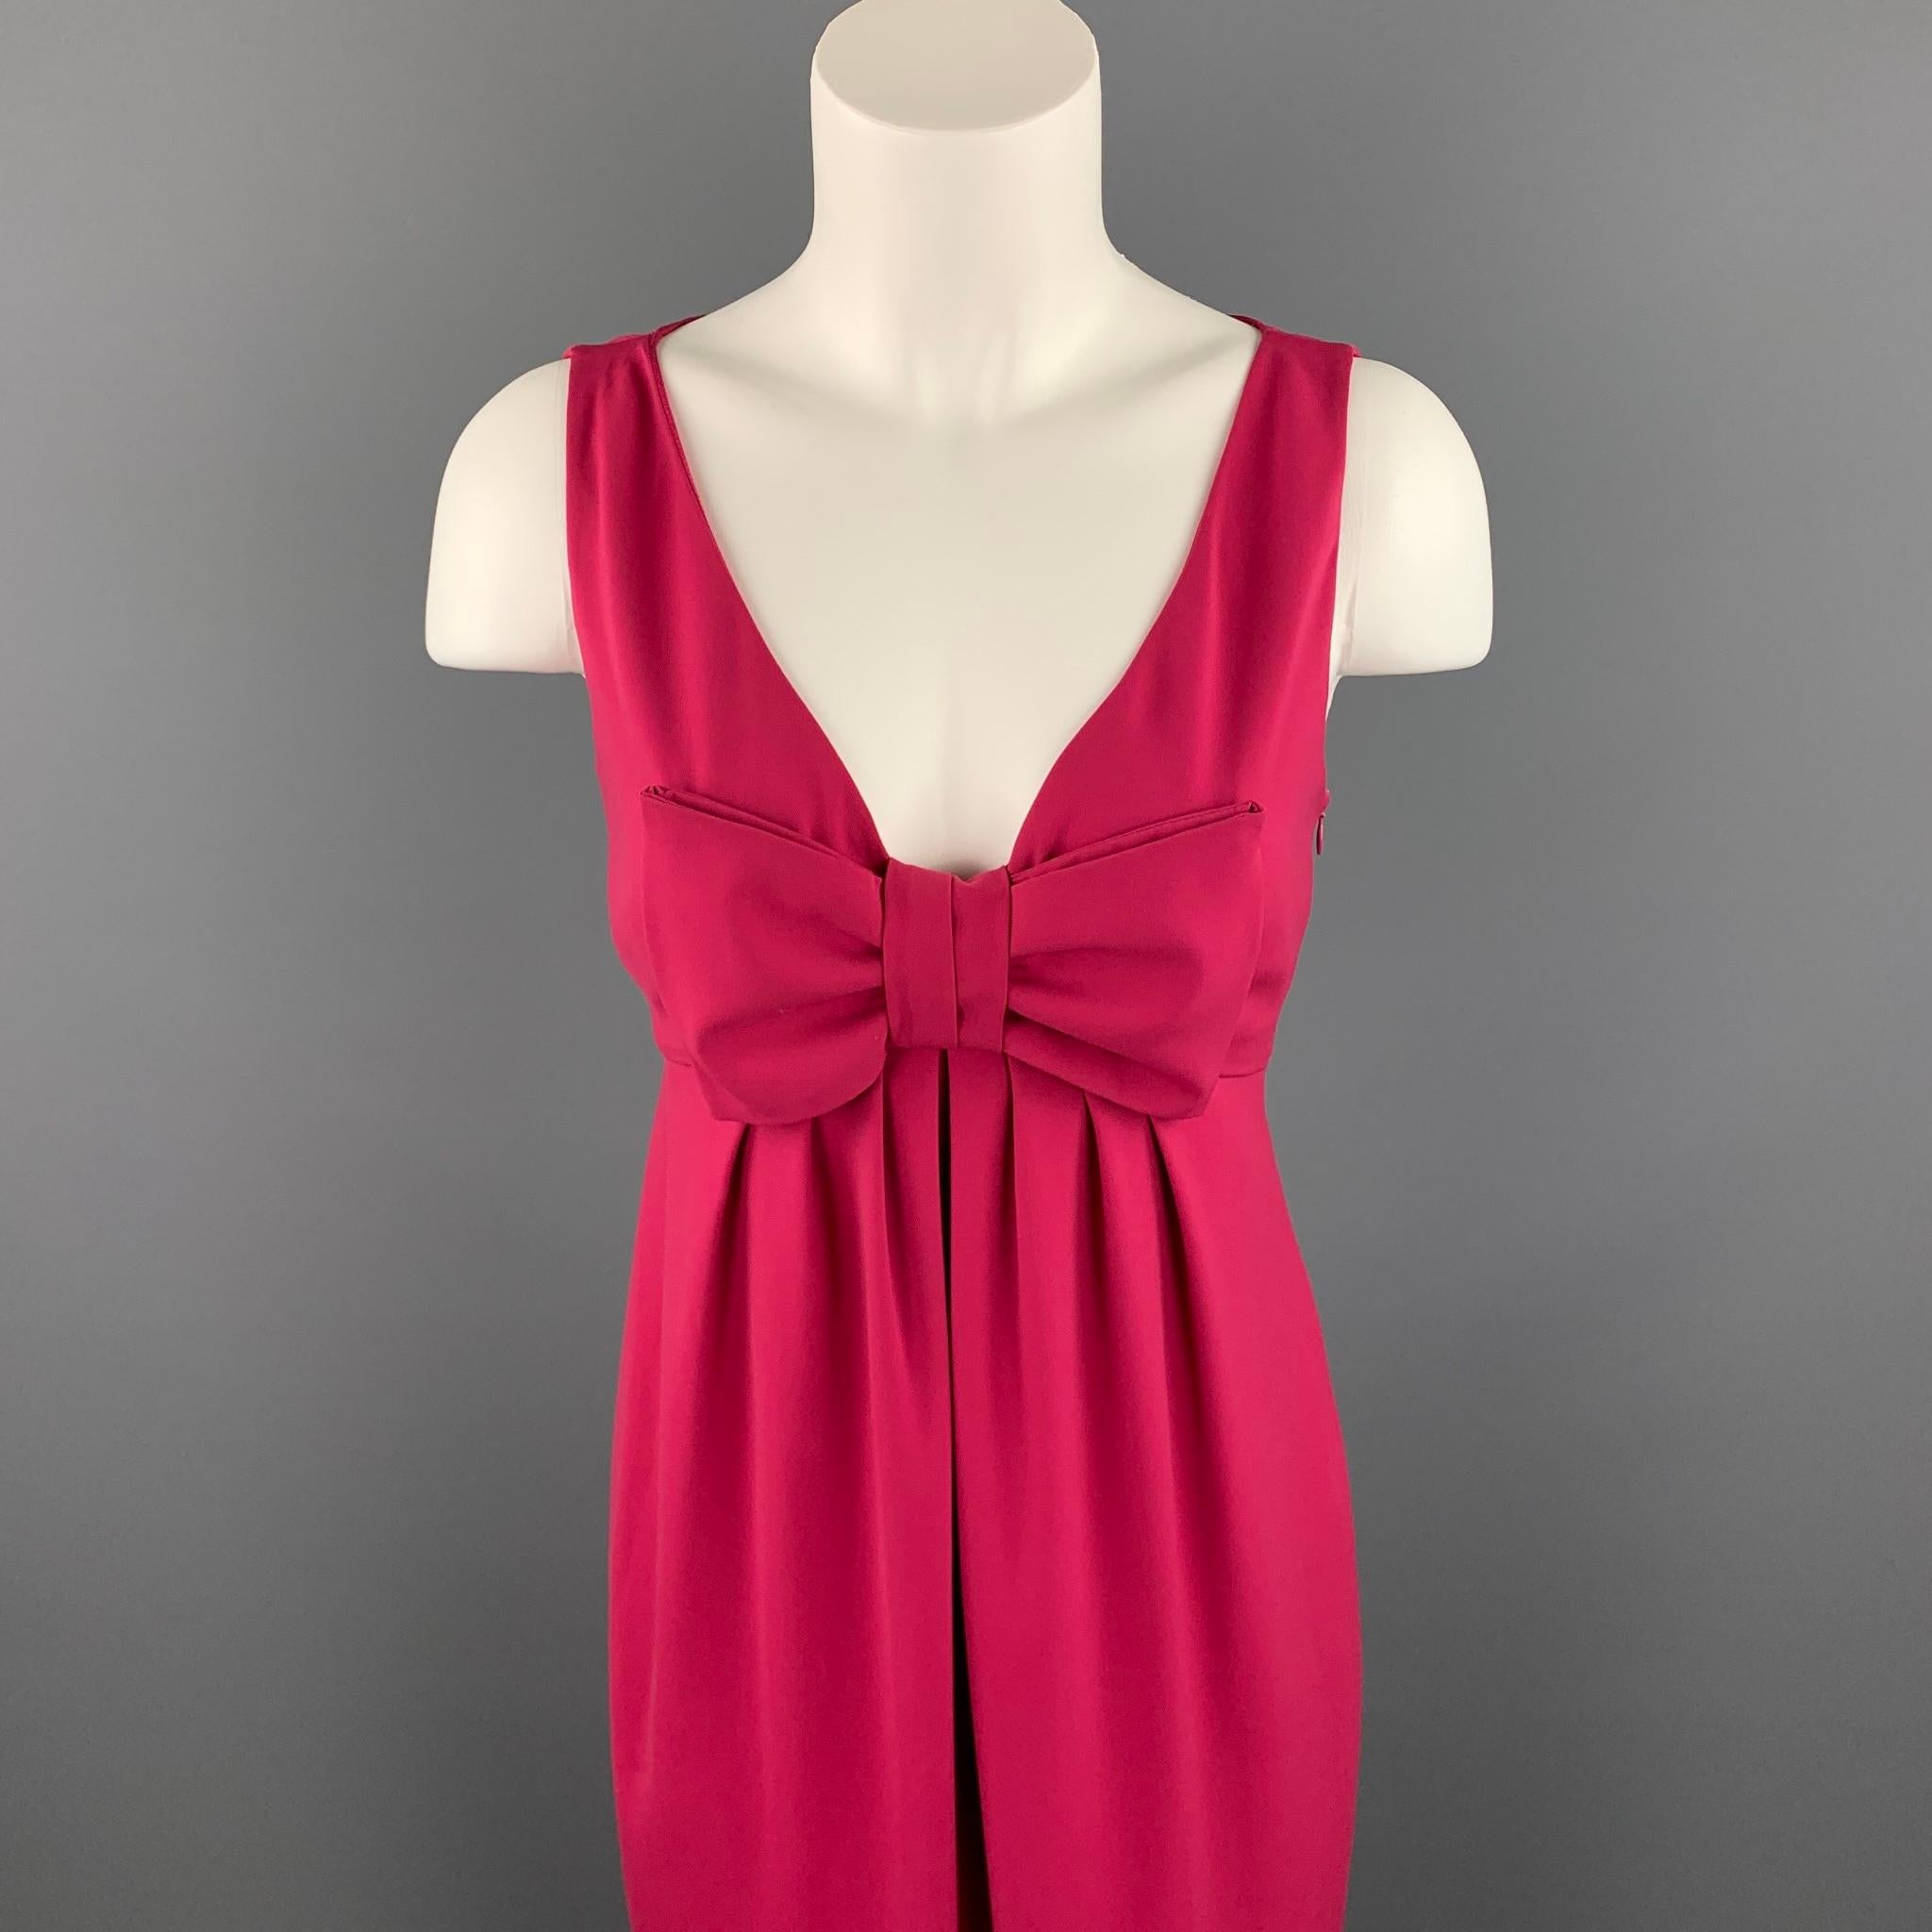 MOSCHINO cocktail dress comes in a fuchsia polyester featuring an empire waist, v-neck, front bow detail, and a side zipper closure.

Very Good Pre-Owned Condition.
Marked: 8

Measurements:

Shoulder: 12.5 in. 
Bust: 16 in. 
Waist: 29 in. 
Hip: 40